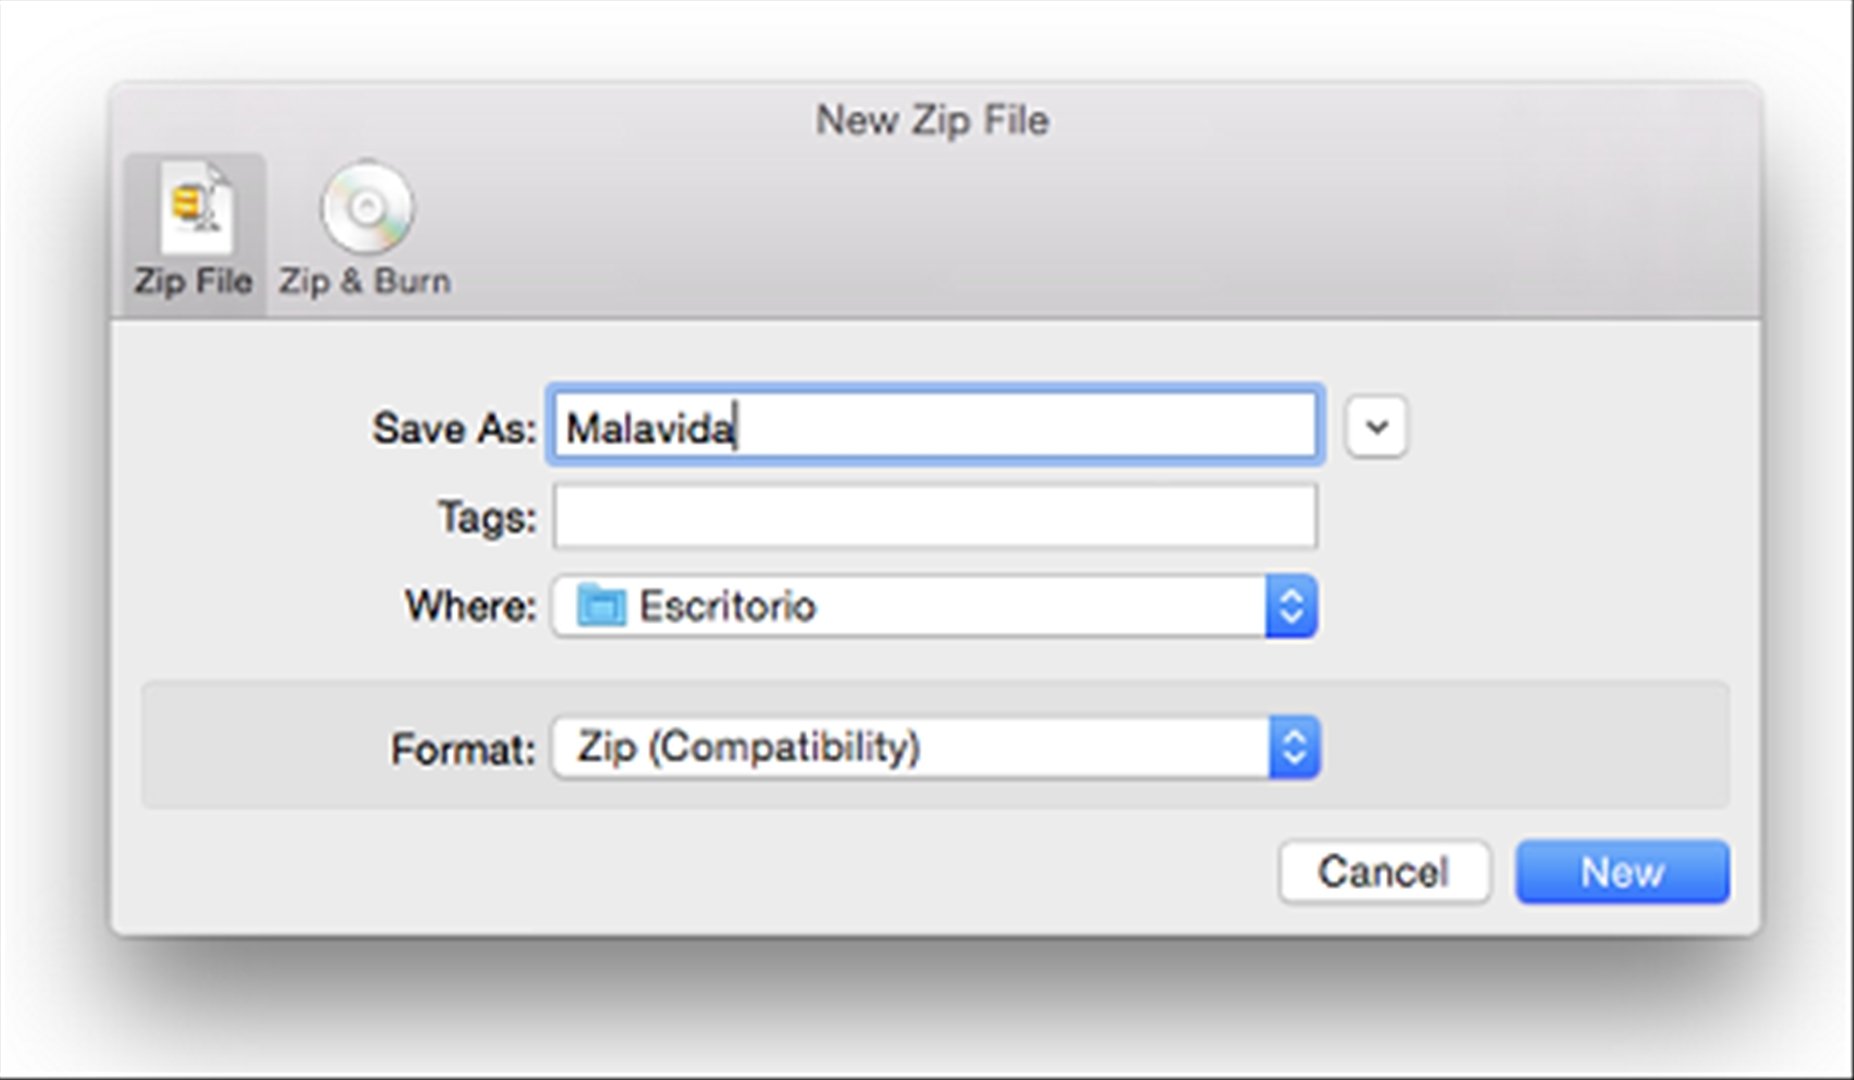 how to download winzip for mac